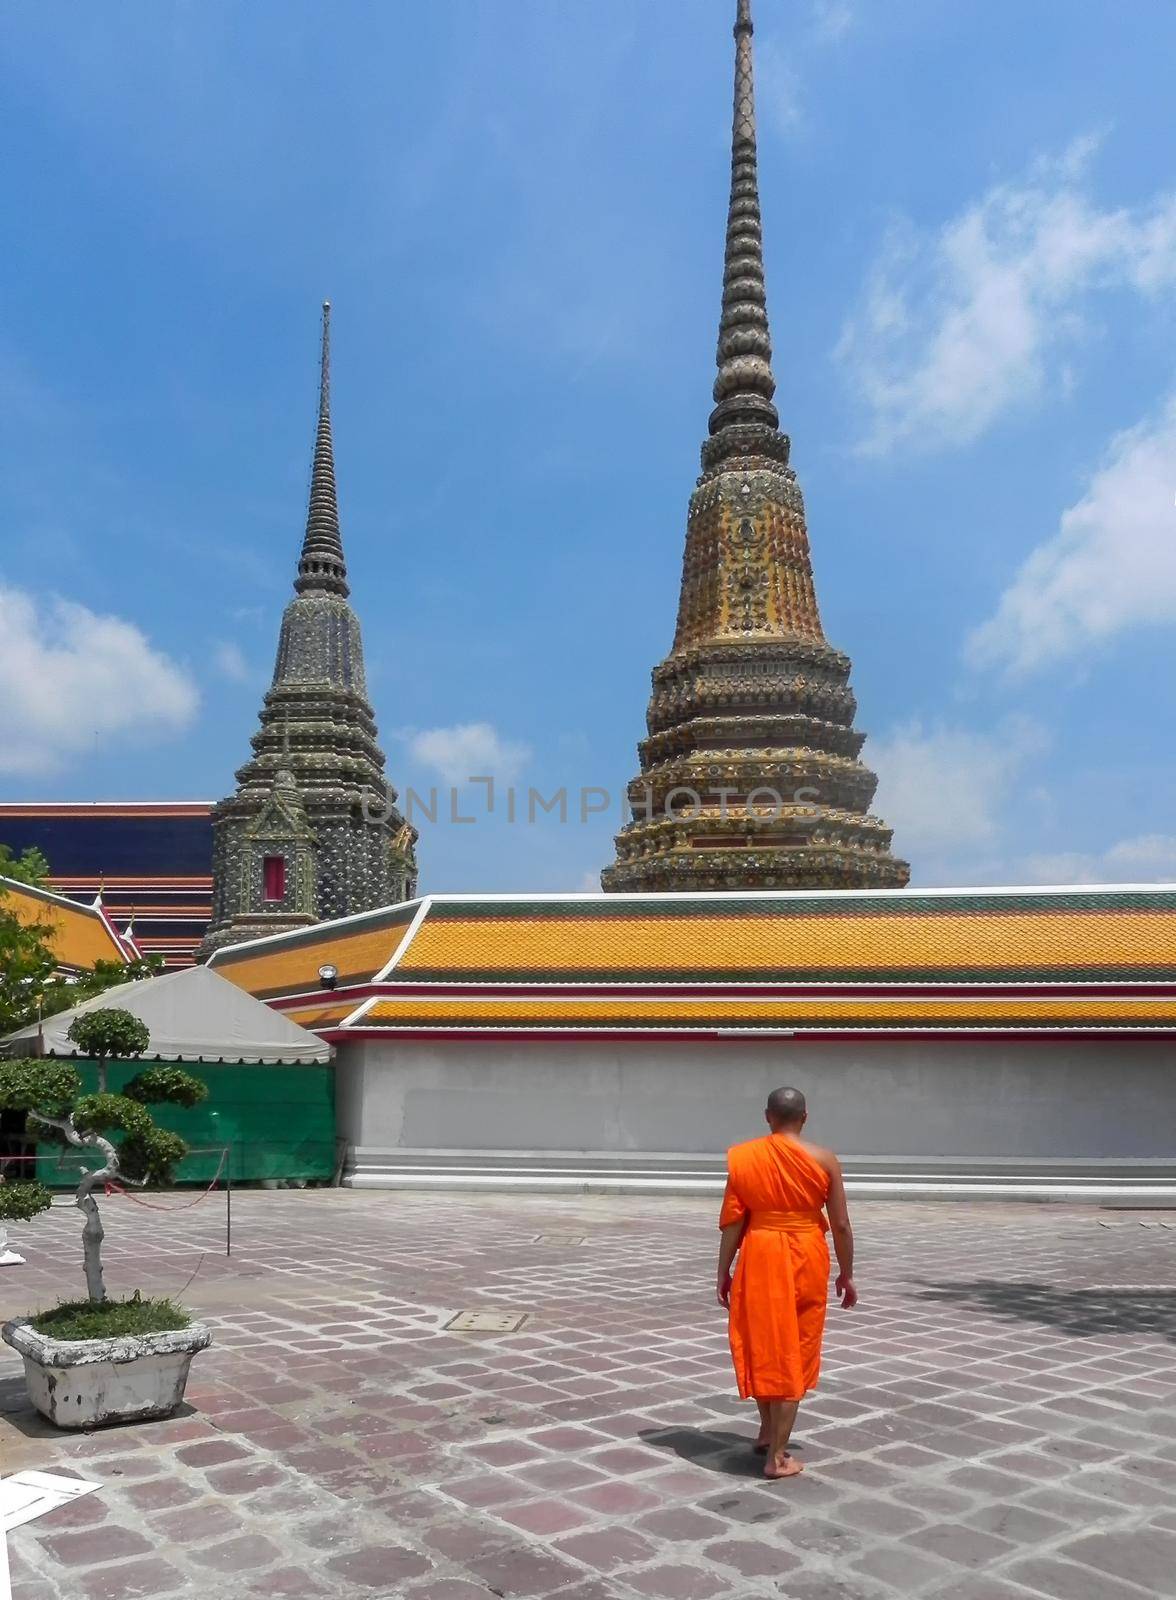 Buddhist monk at the temple of Wat Pho in Bangkok.